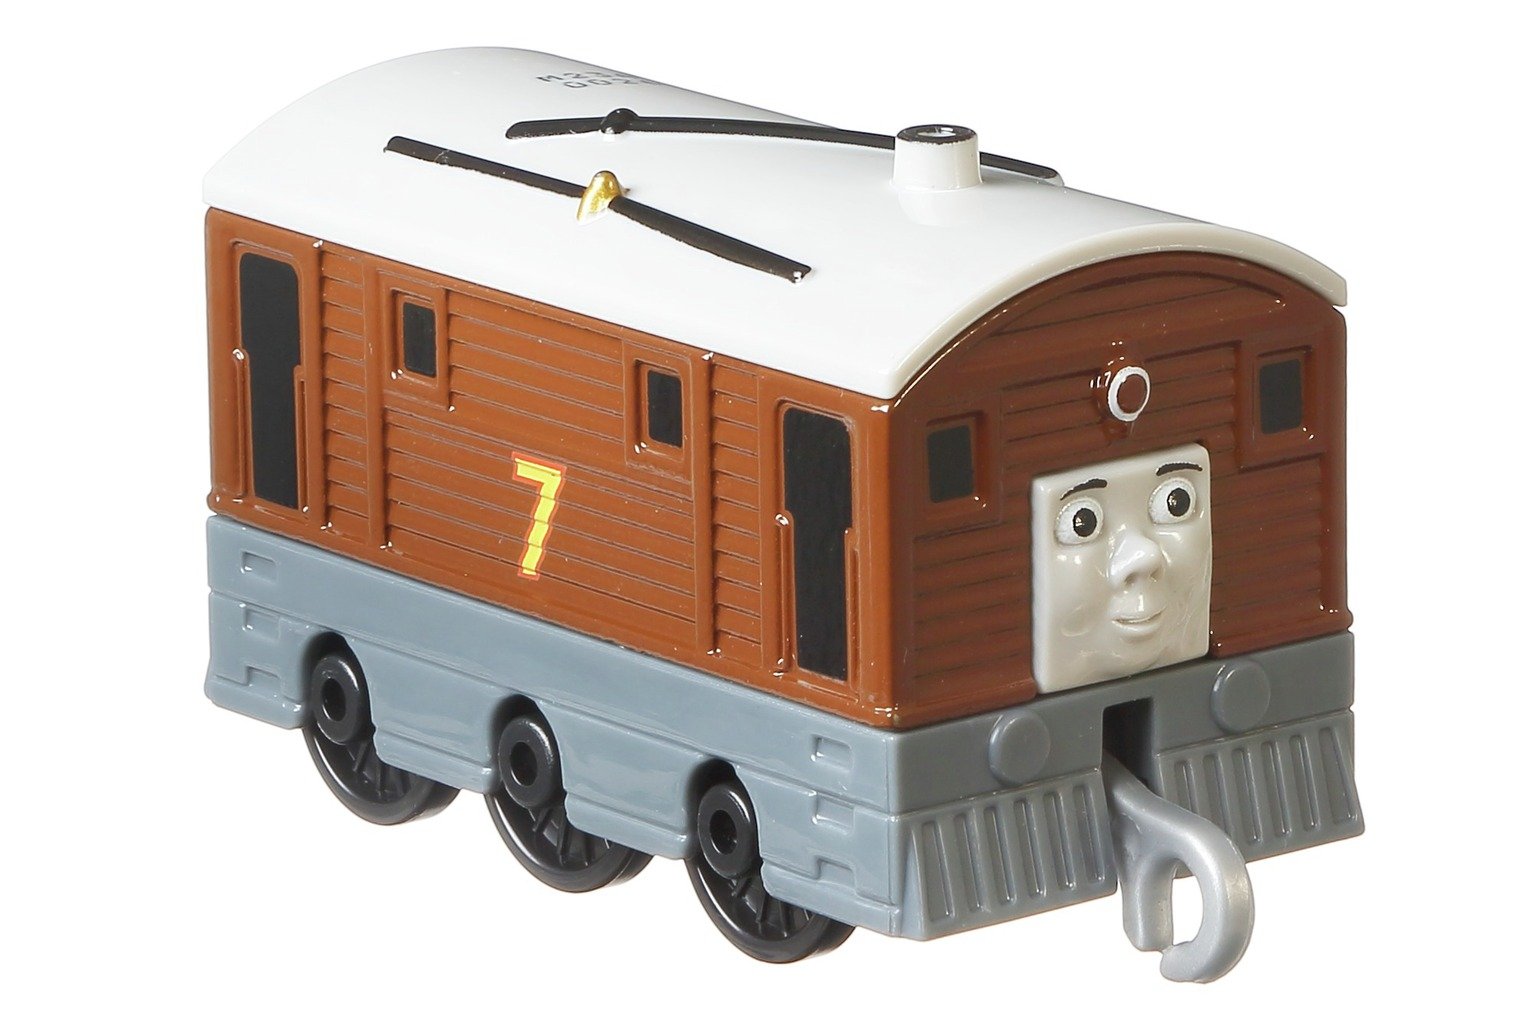 thomas and friends toby toy